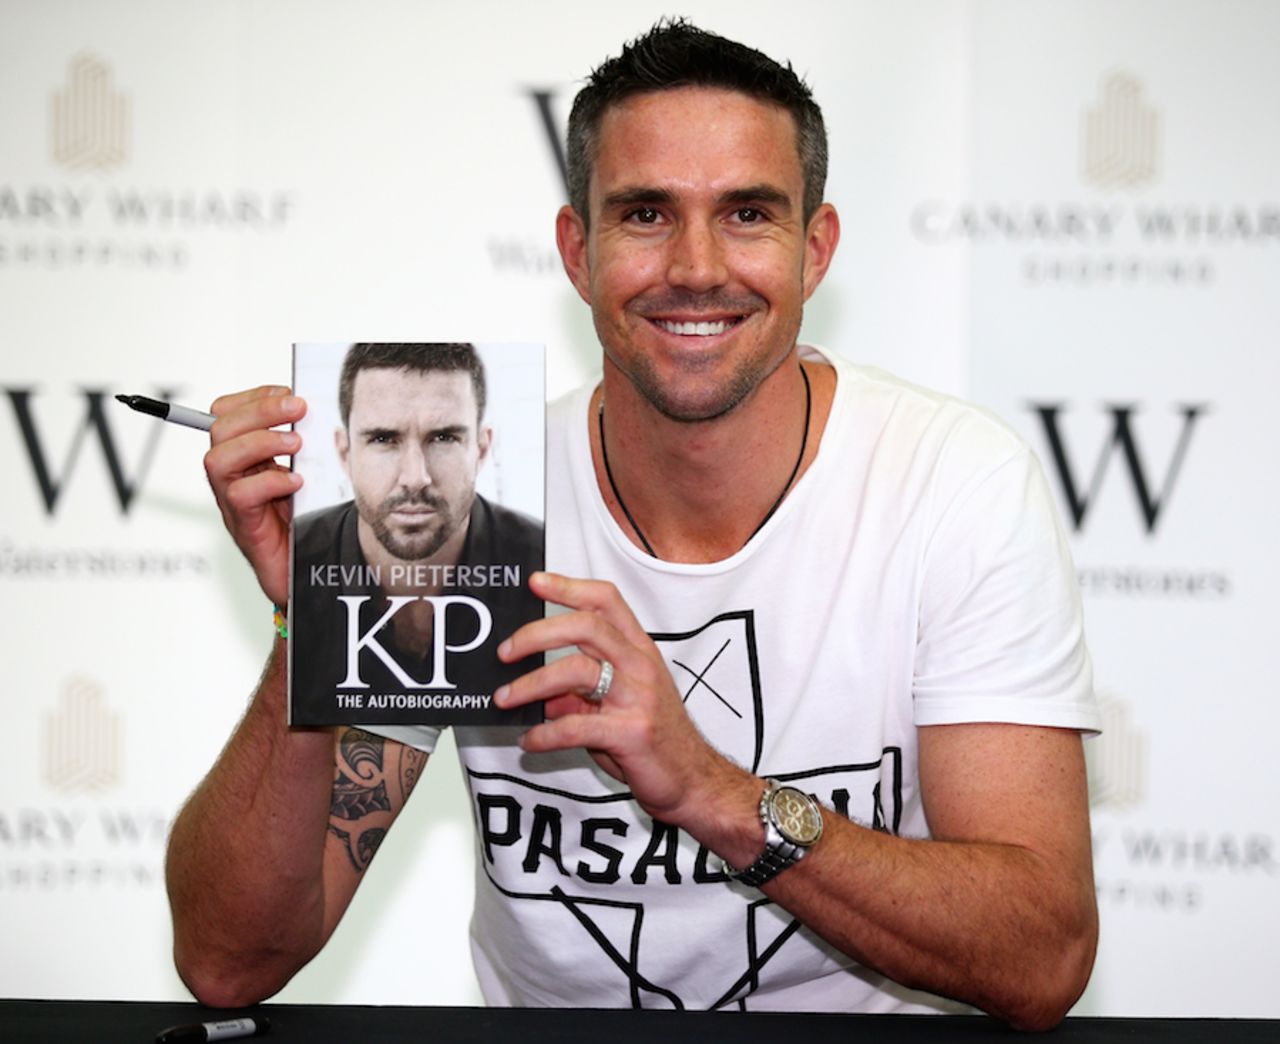 Kevin Pietersen at the book signing of his autobiography in Canary Wharf, London, October 9, 2014